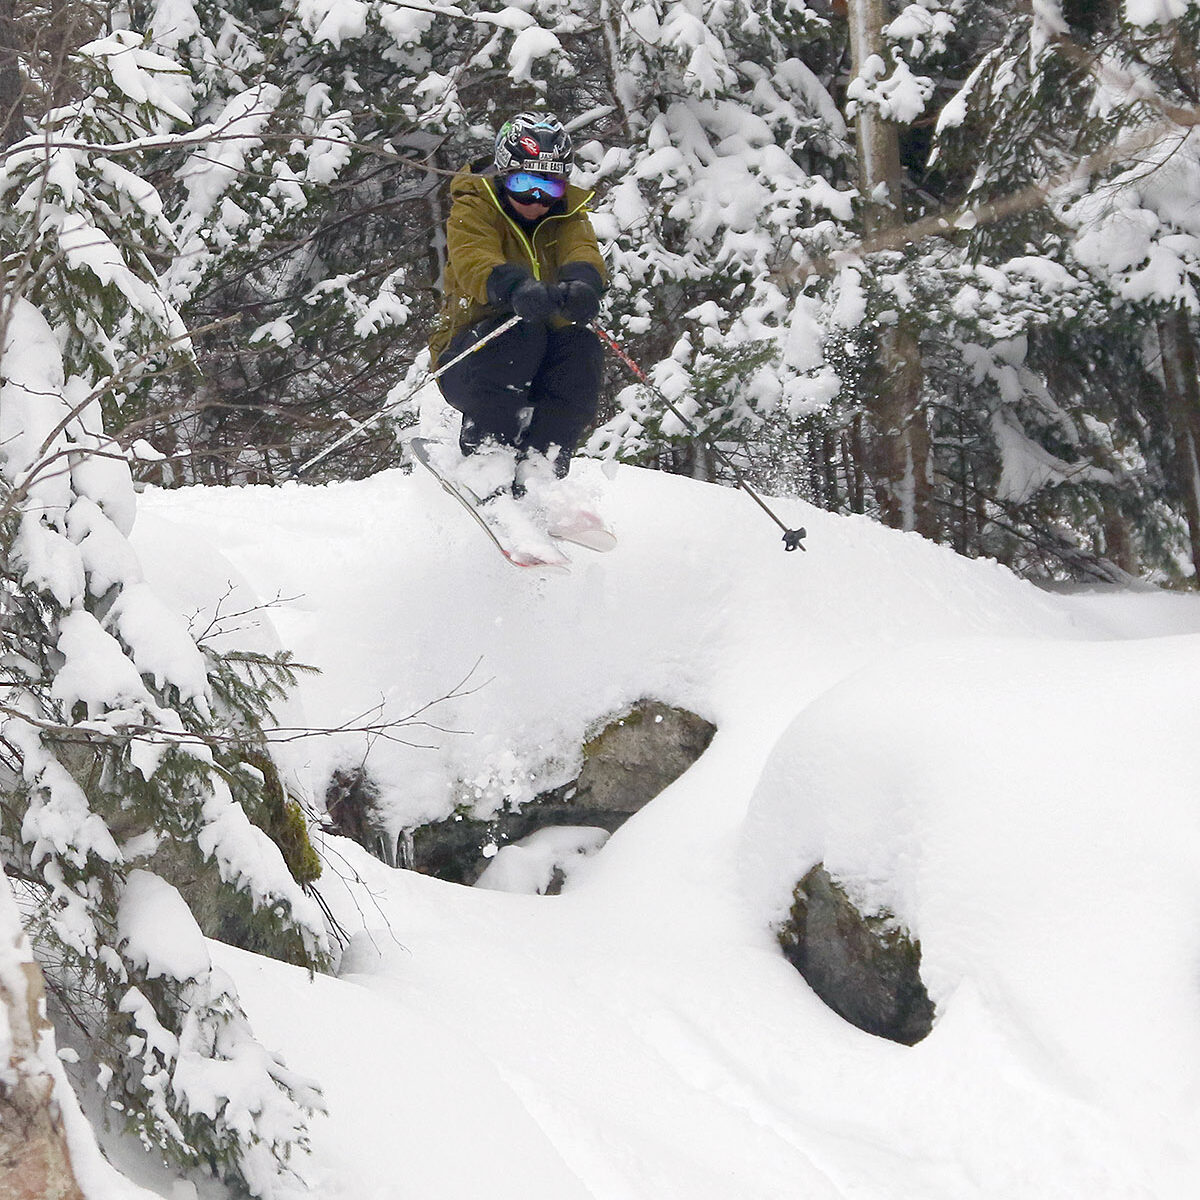 An image of Jay jumping in the Wood's Hole area of Timberline after plentiful snow from Winter Storm Kassandra at Bolton Valley Ski Resort in Vermont